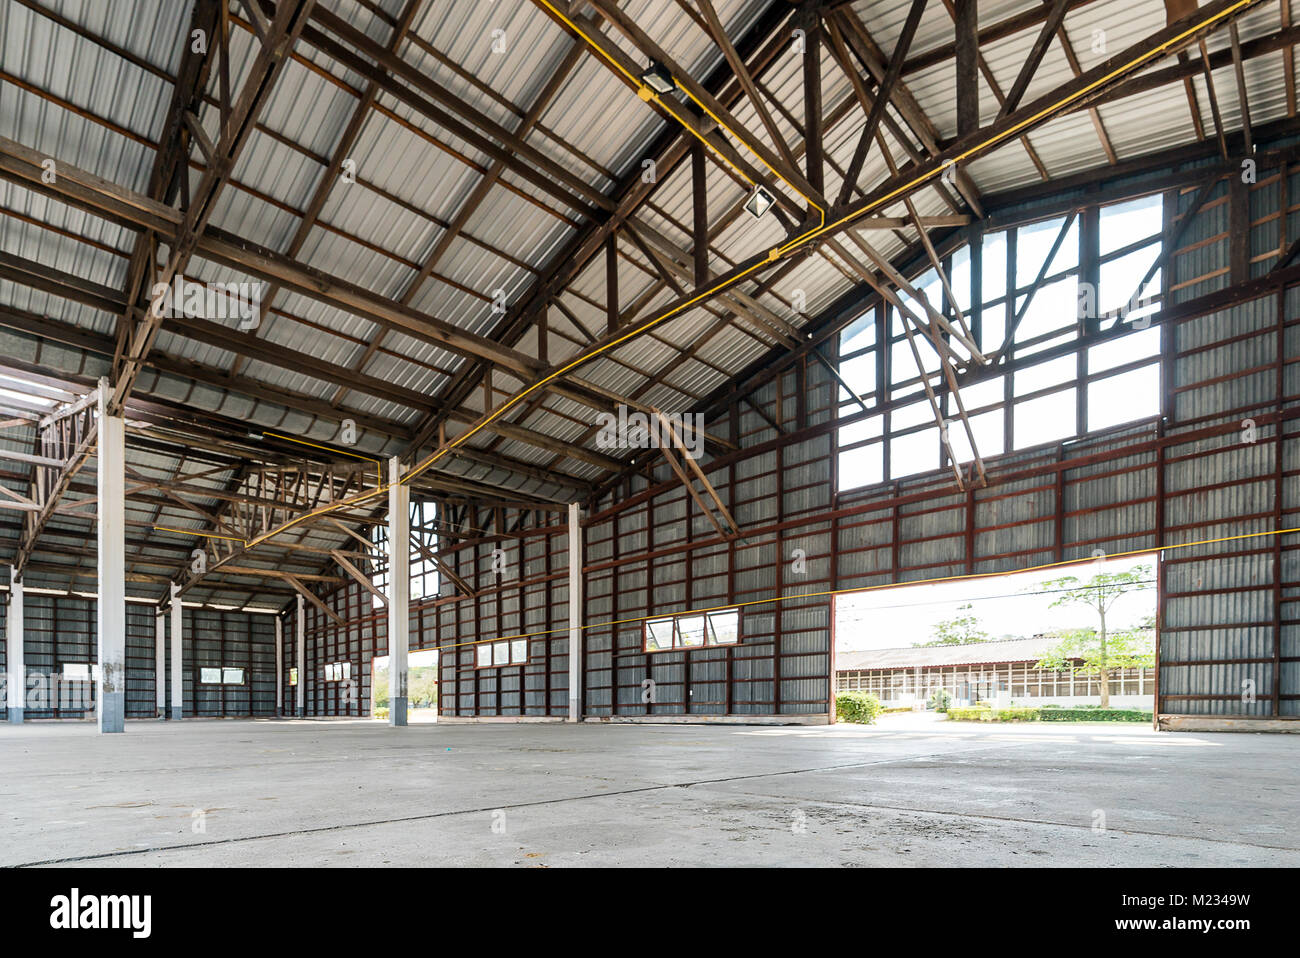 Empty old and rustic hangar building Stock Photo